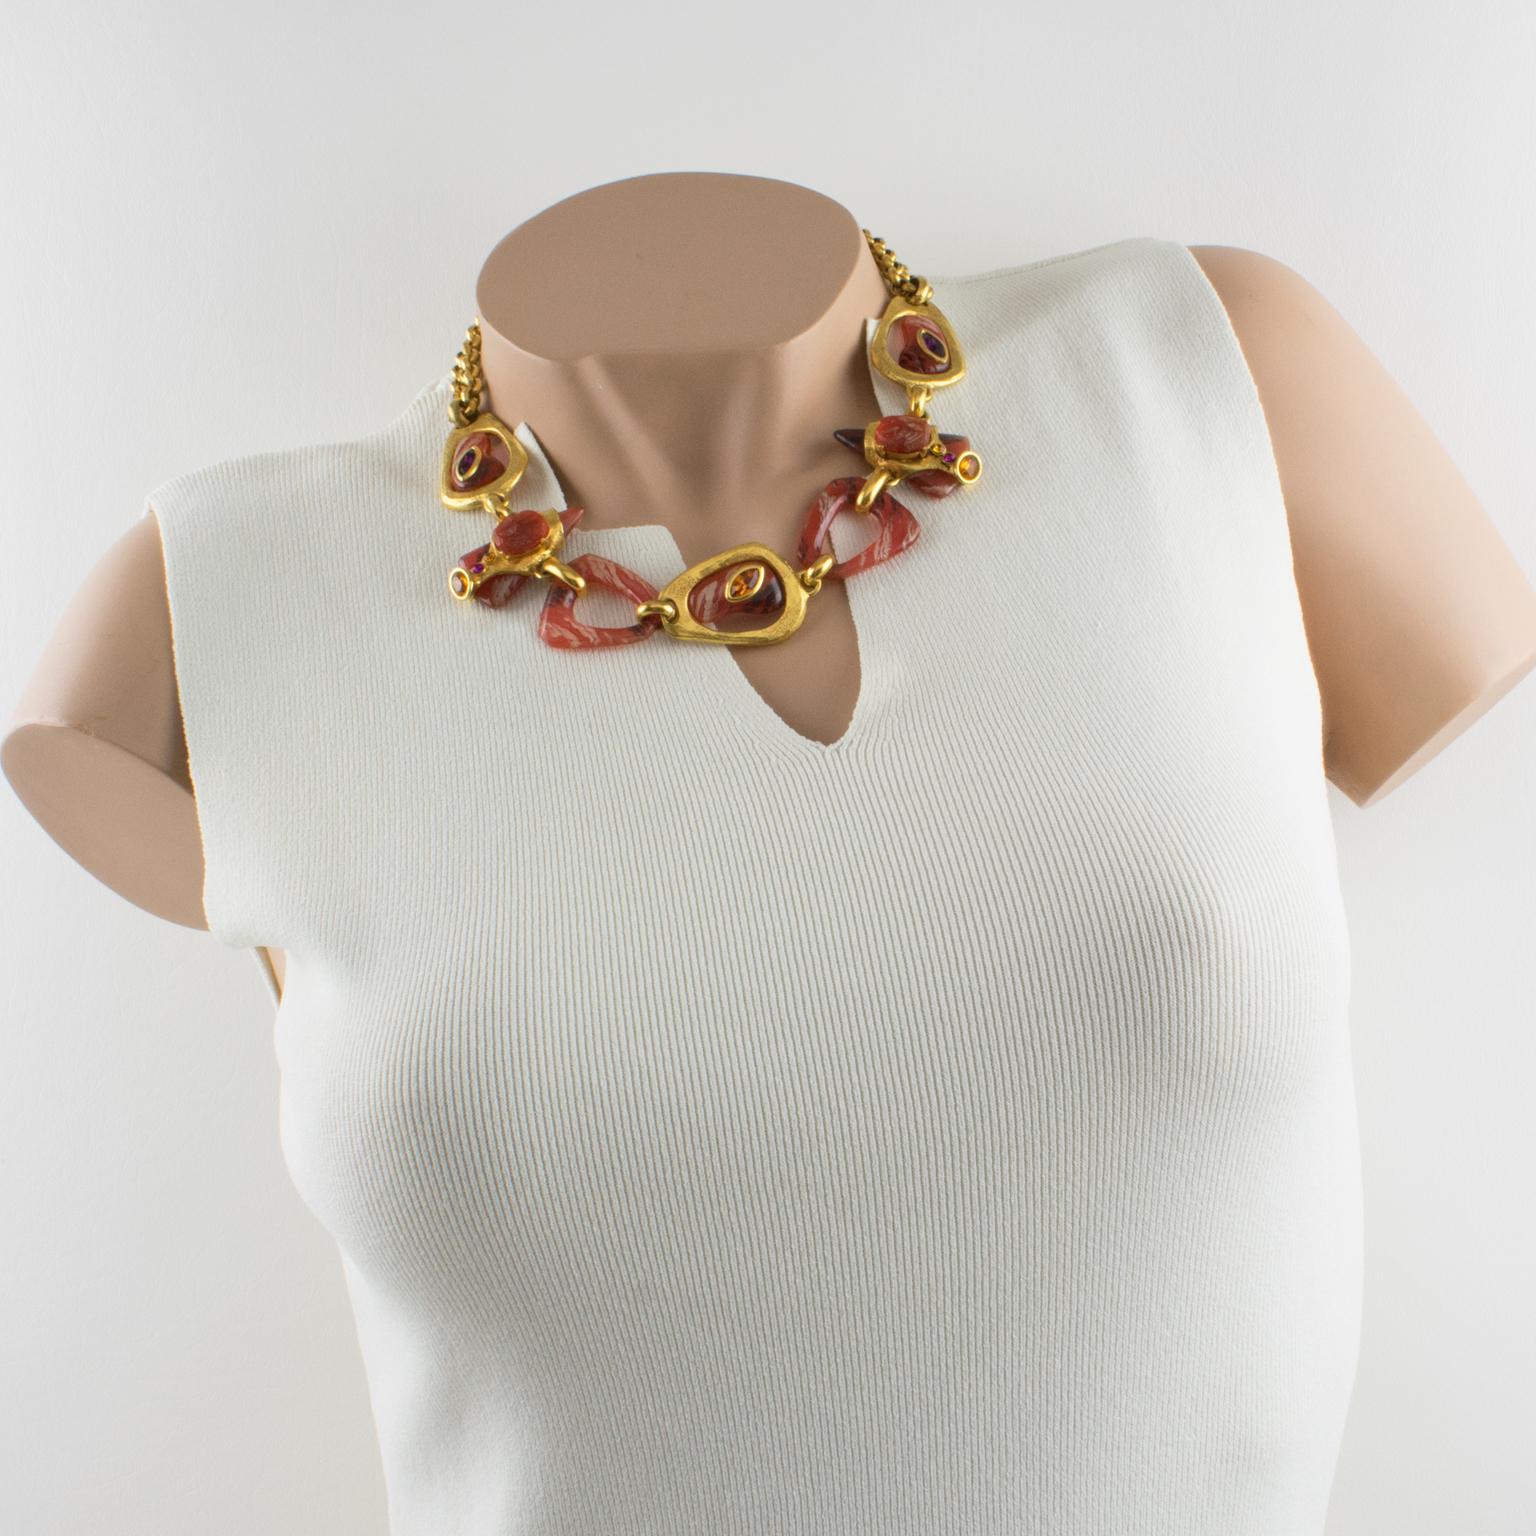 Beautiful Christian Lacroix Paris signed choker jeweled necklace. Double strand heavy gilt metal chain compliments with a large modernist front pendant in brushed gilt metal, ornate with burnt orange resin links and carved cabochons, and topped with